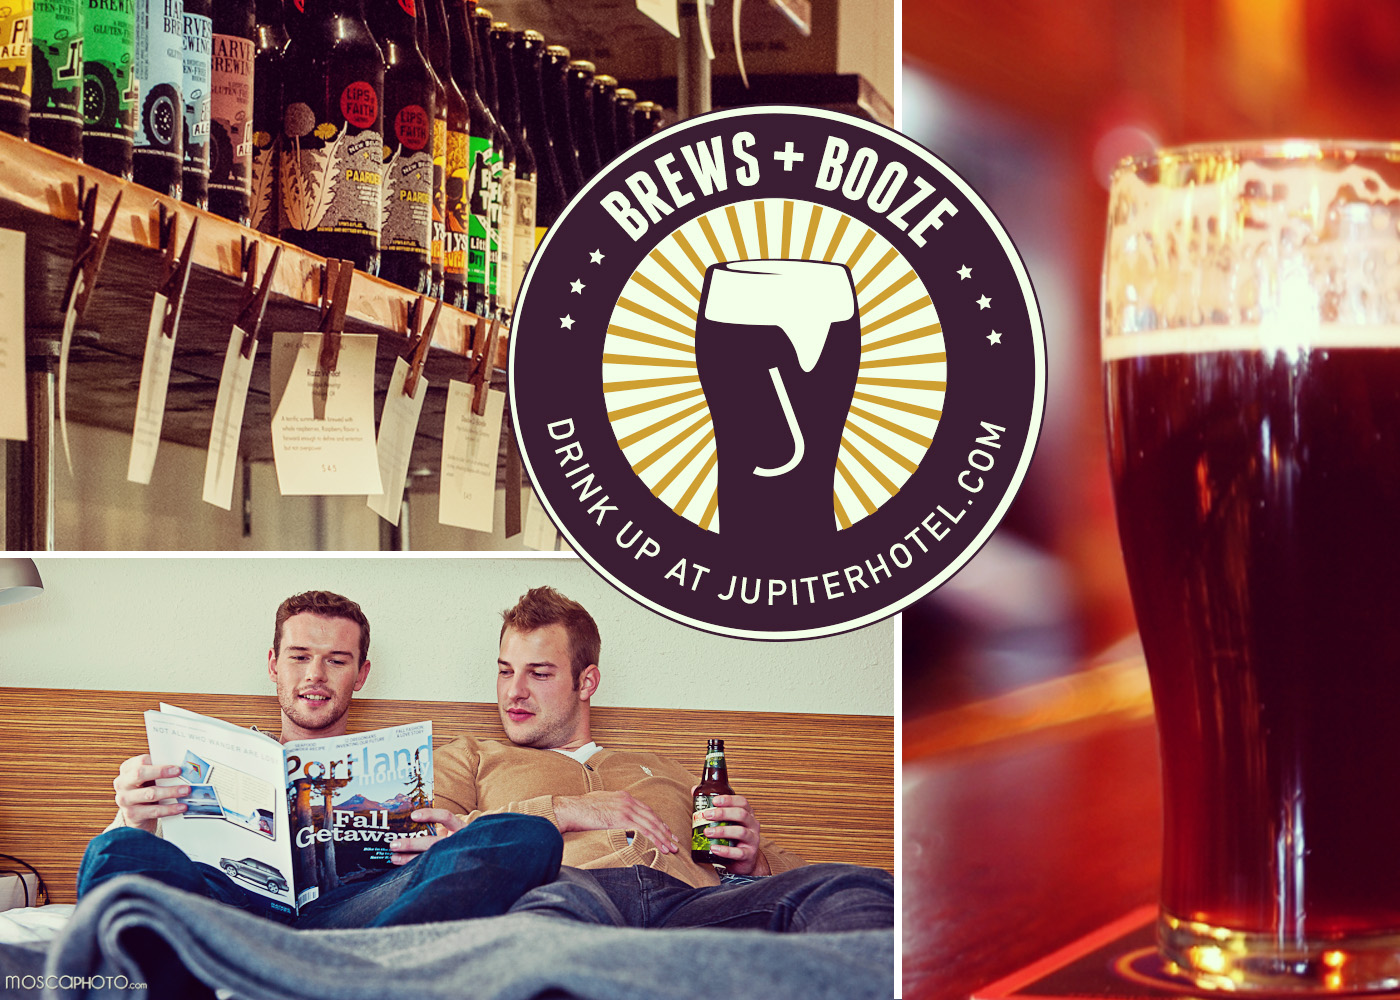 Jupiter Hotel Portland Experience - Brews and Booze Package Connects Guests with the Craft Beer Scene in PDX